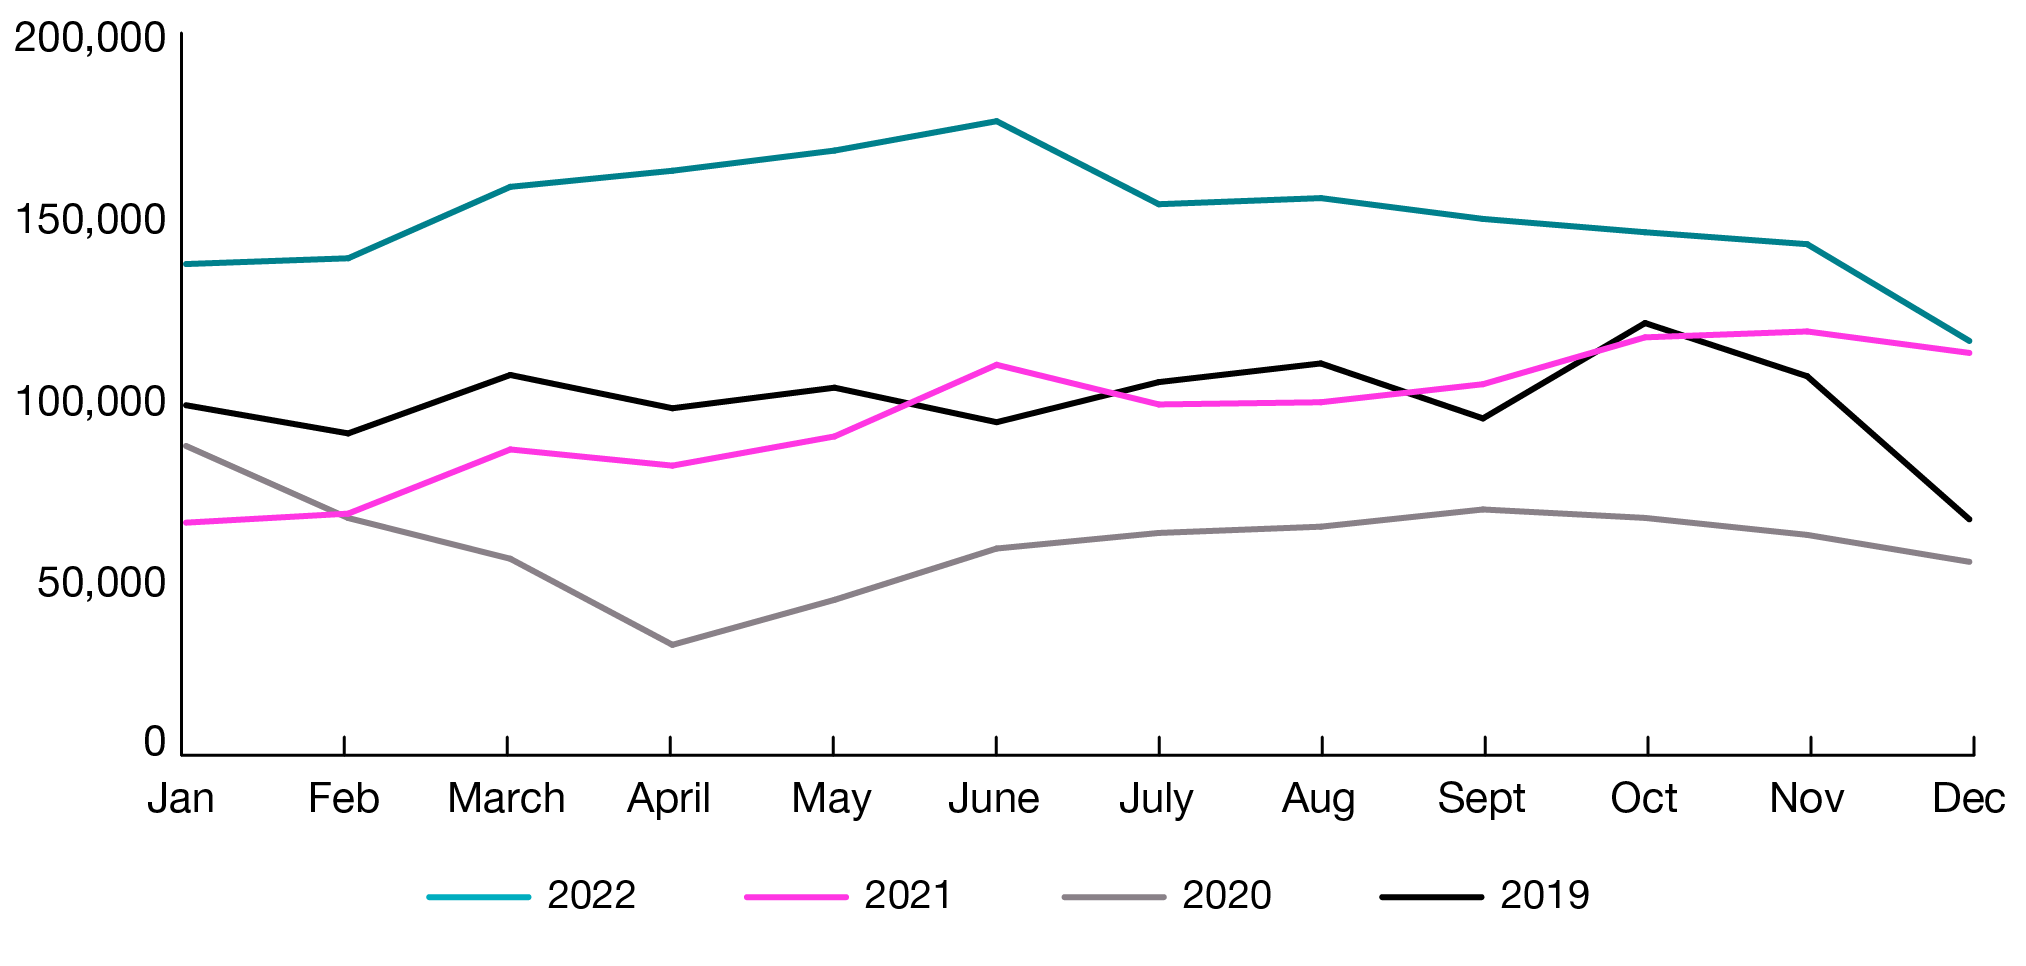 A line graph comparing the number of job postings between 2019 and 2022 for each month. The number of job postings for every month in 2022 was higher than in each of 2019, 2020 and 2021.]